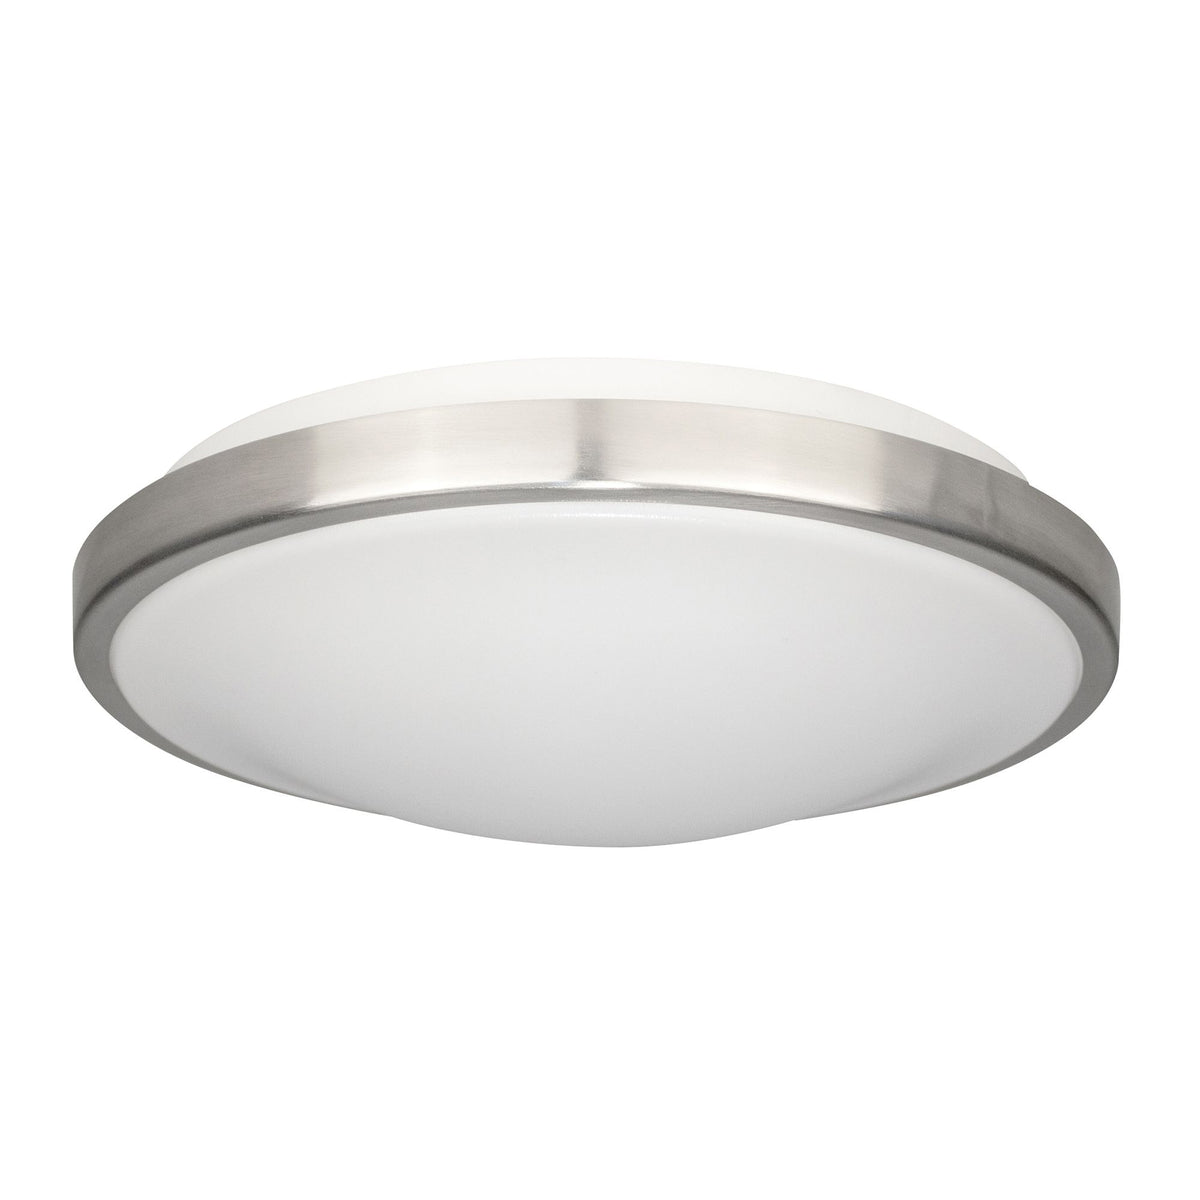 Iluminpro Flush Mount Ceiling Light Fixture LED (Milk White Shell / 16 Inch / 25W, 2000 LM), 3 CCT, Dimmable